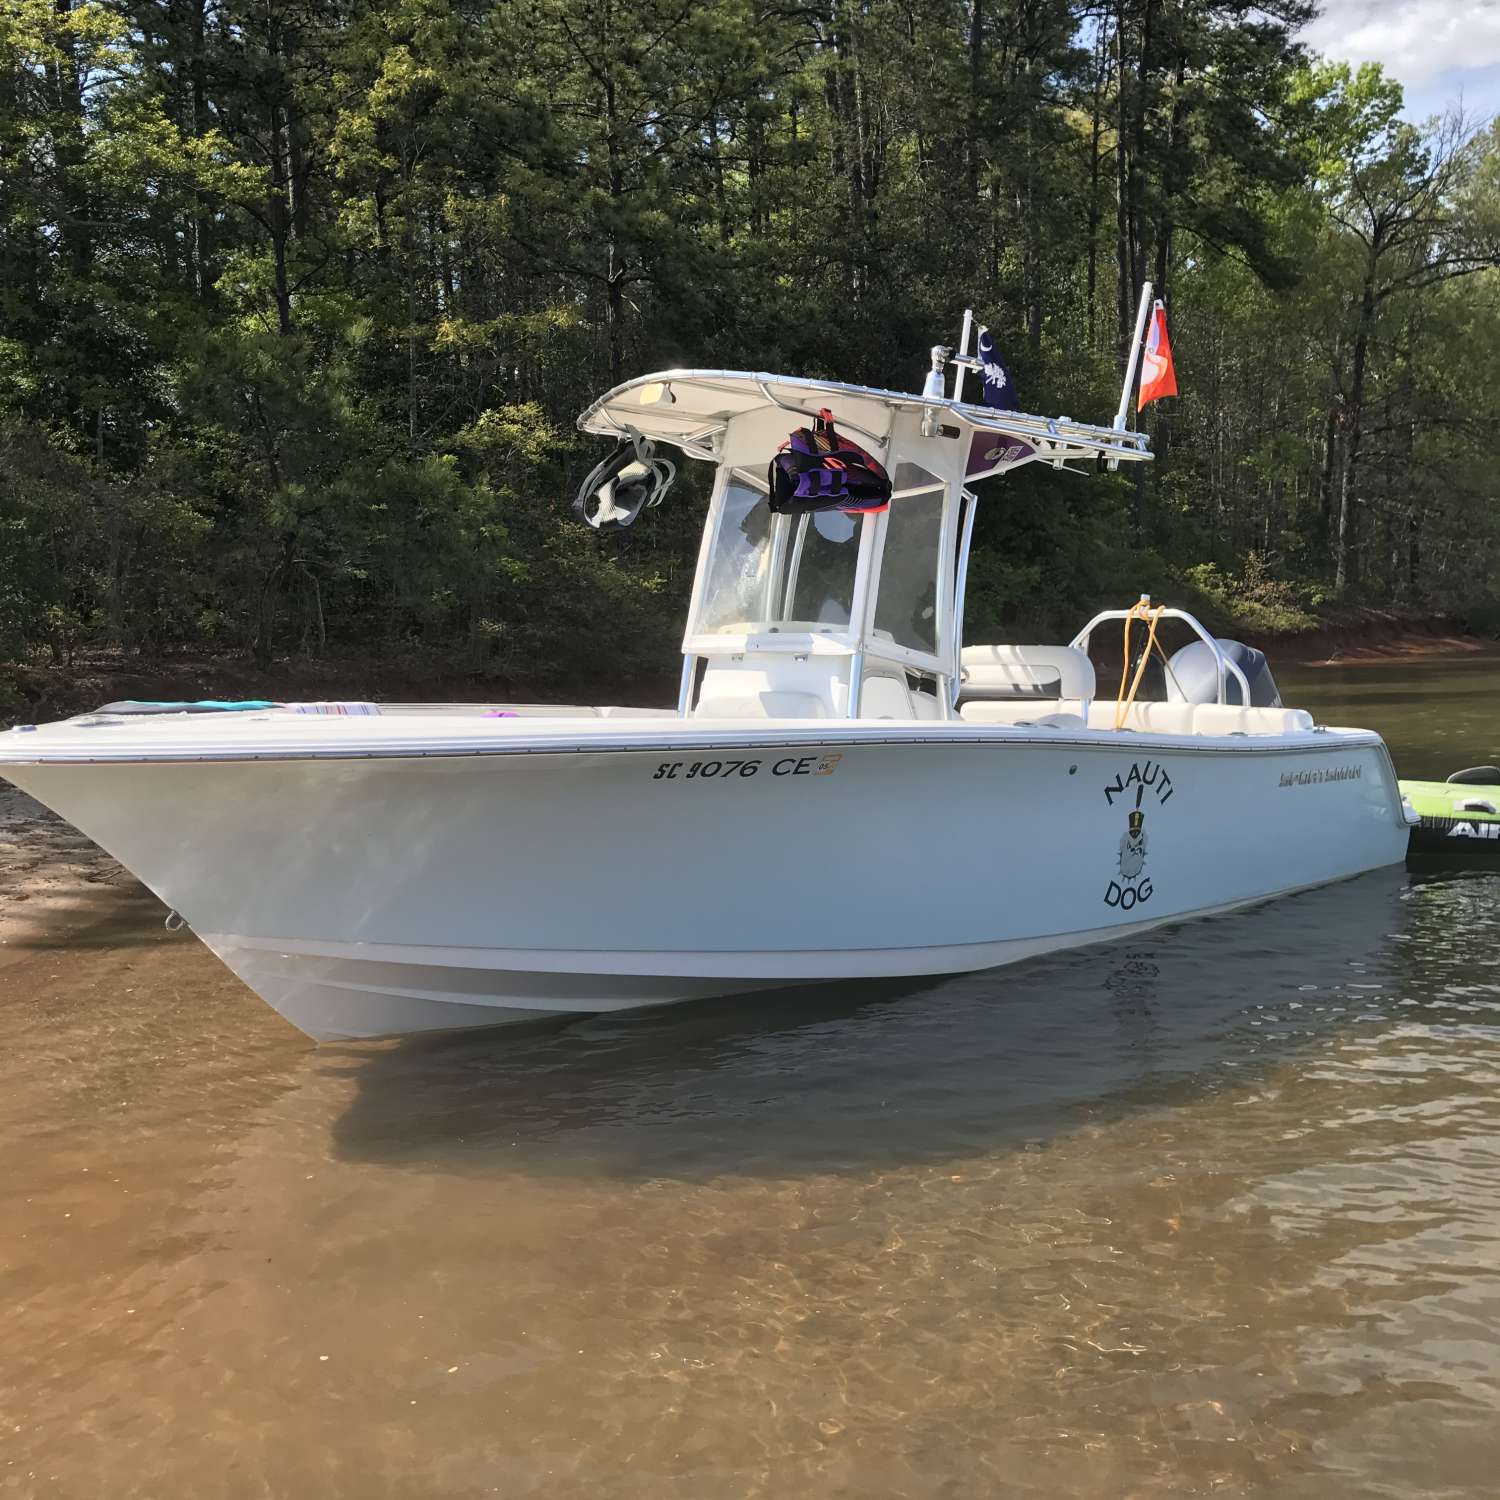 We took our boat from Charleston up to Lake Keowee and loved running her in fresh water for a c...